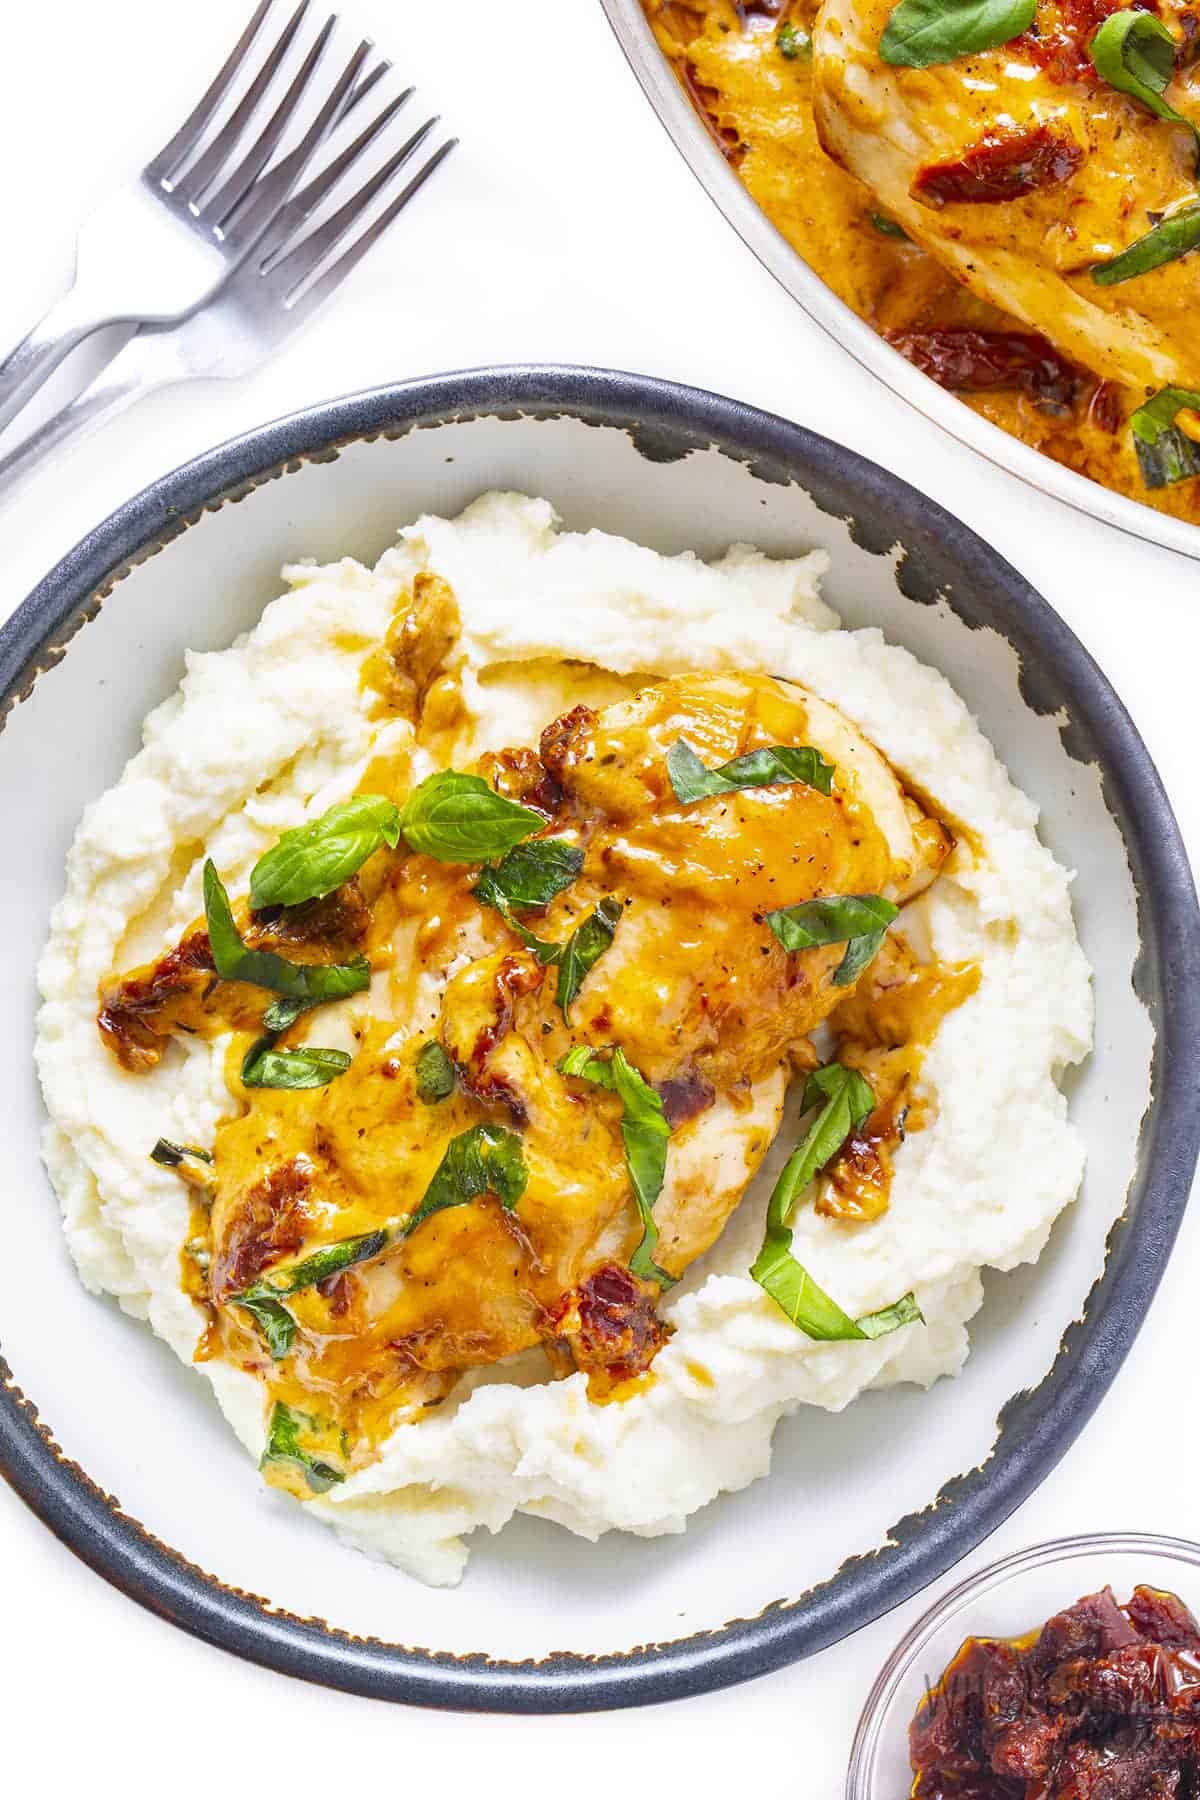 Creamy chicken with sun-dried tomatoes and basil over cauliflower mash